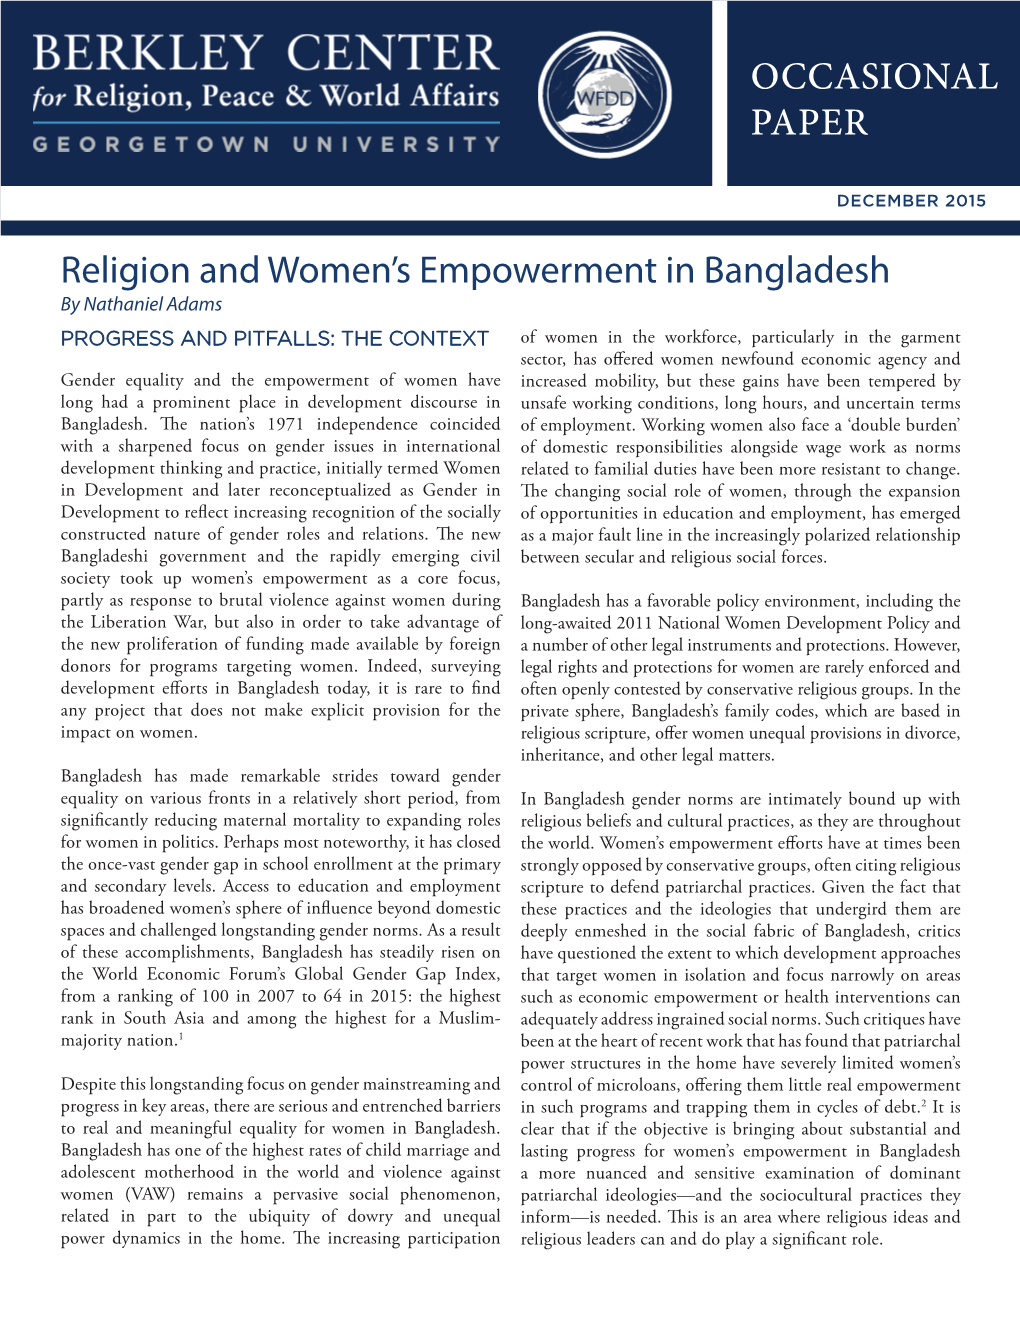 Religion and Women's Empowerment in Bangladesh OCCASIONAL PAPER